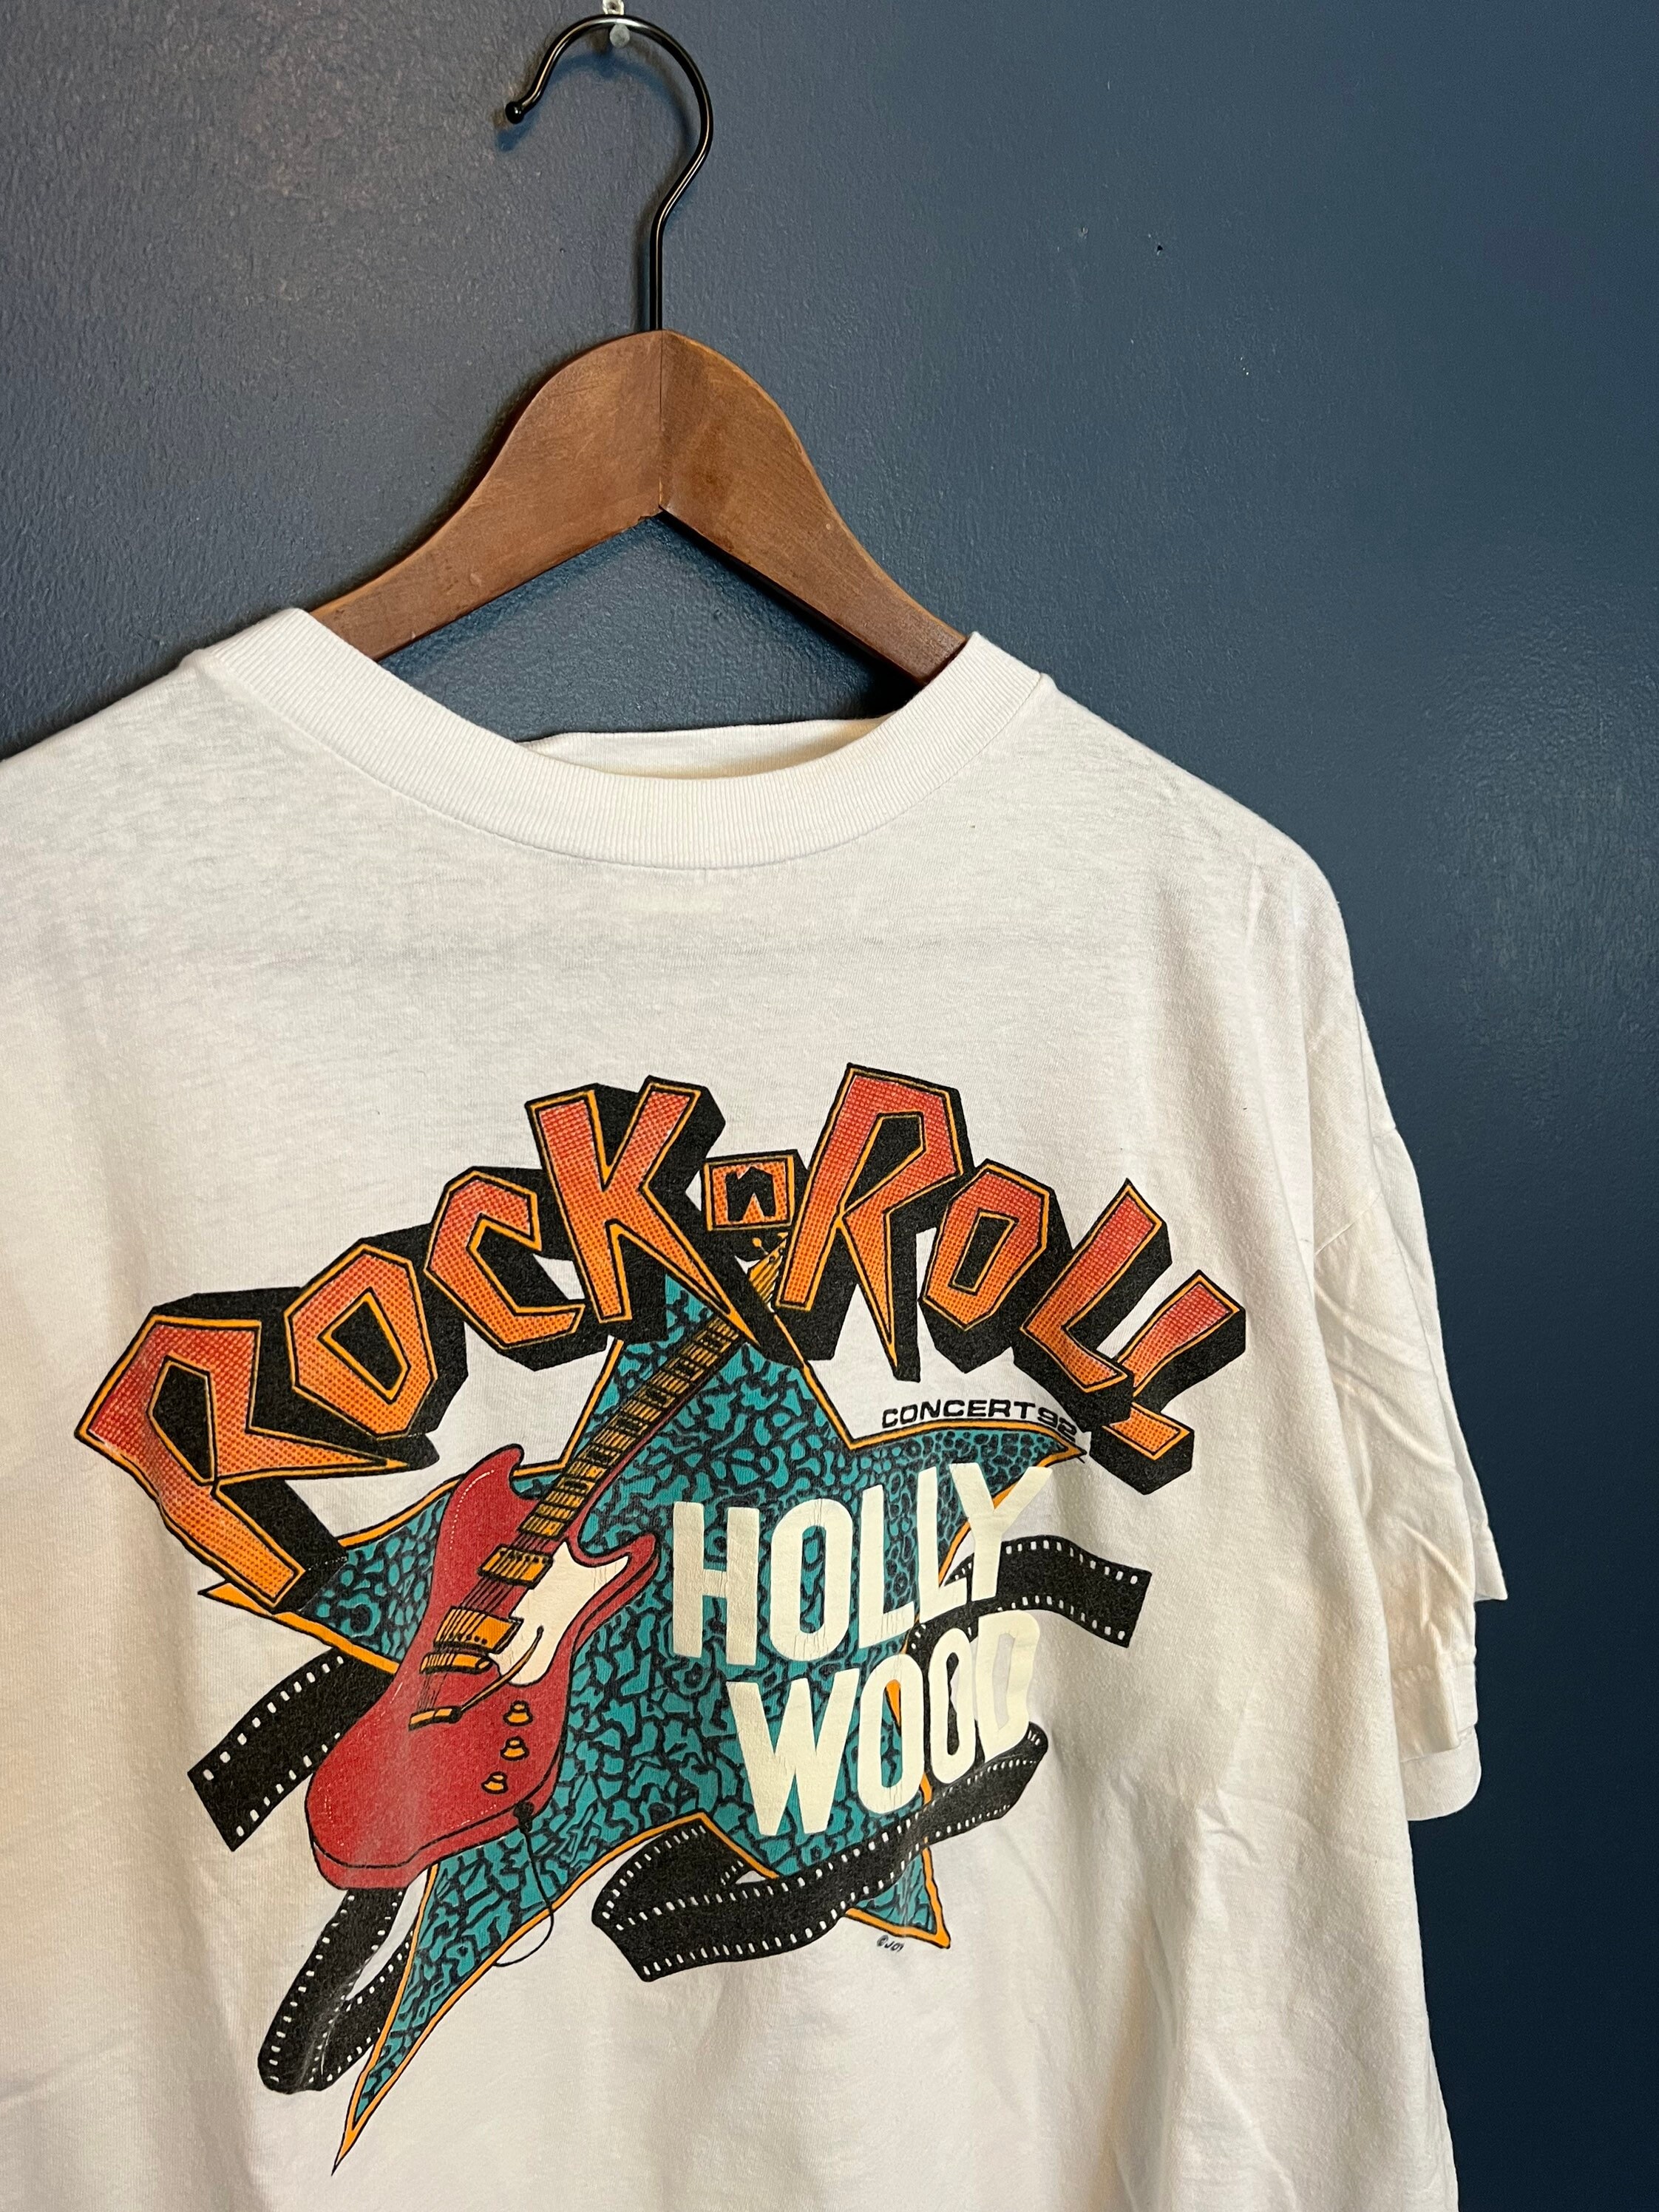 Distill Tage med Arving Vintage 90s Rock and Roll Hollywood Concert Guitar T Shirt - Etsy